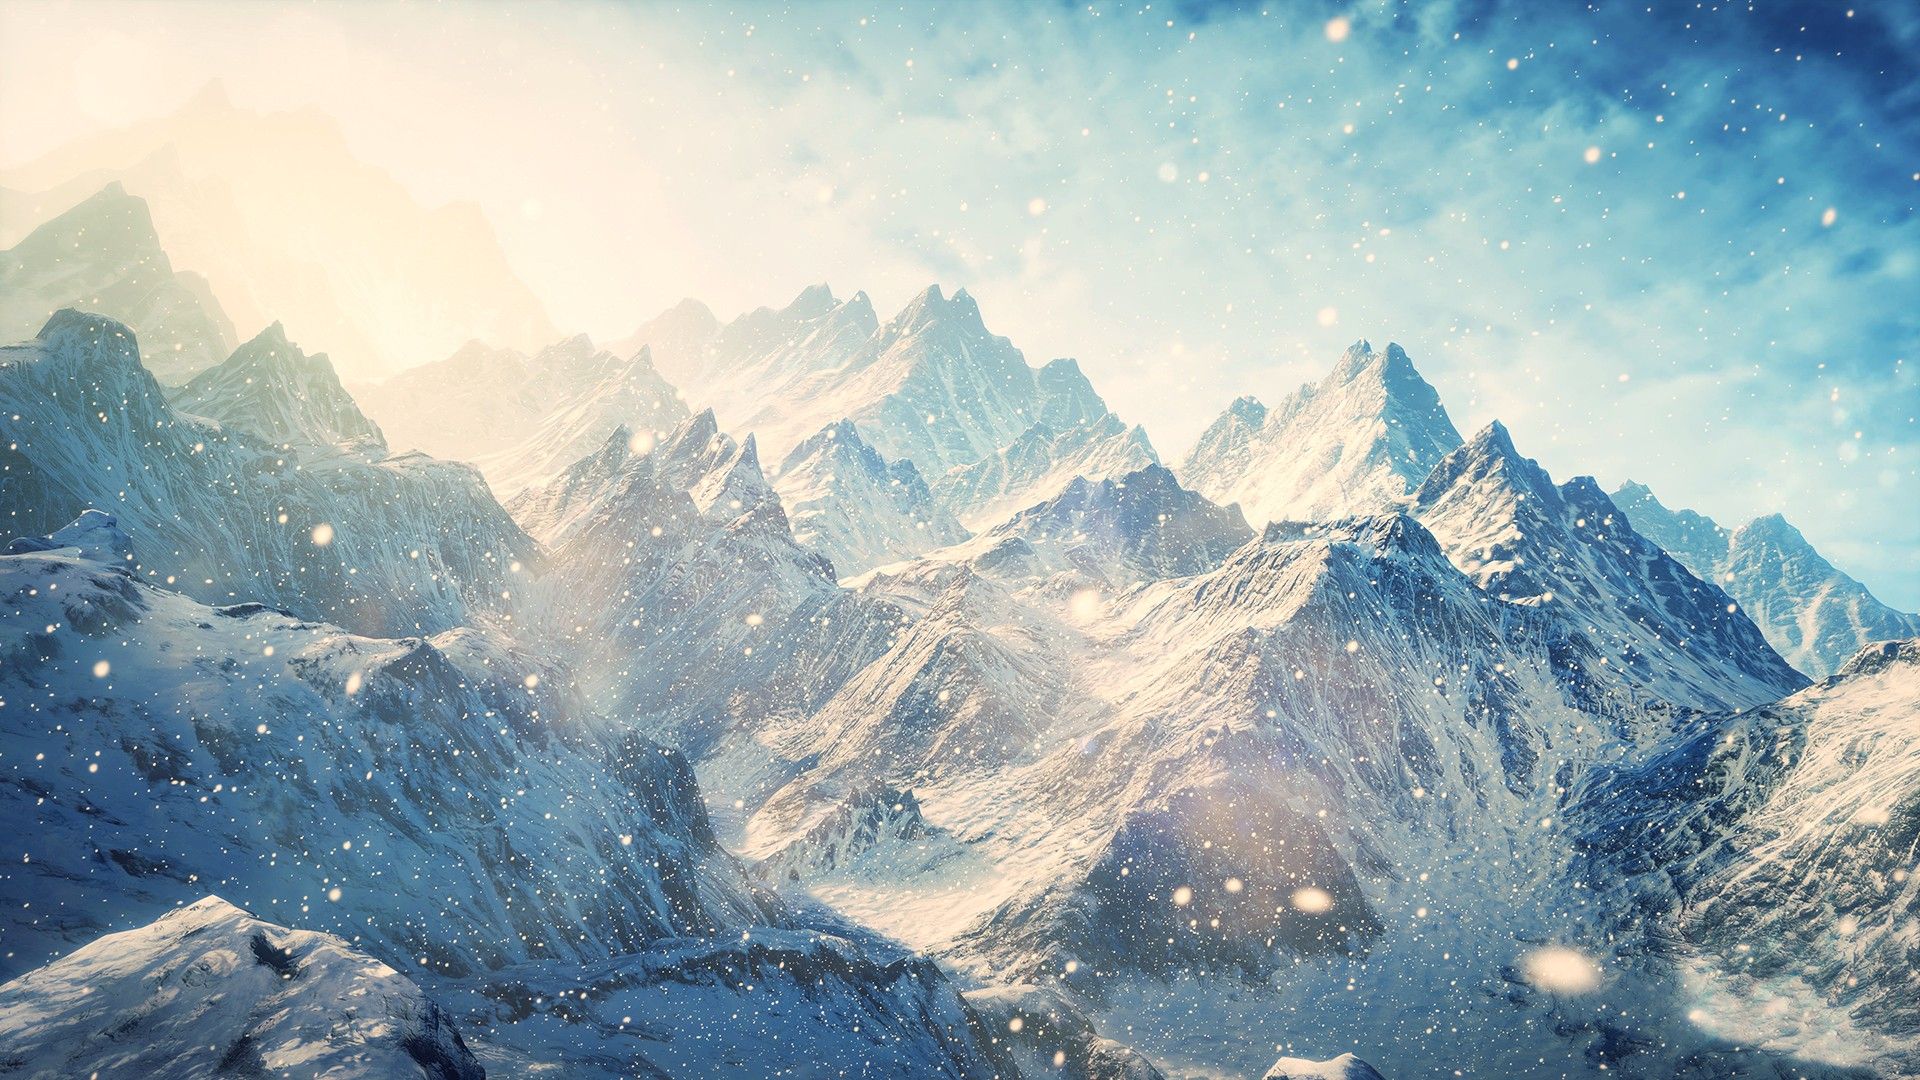 Winter Mountains With Snow HD Wallpaper FullHDwpp Full